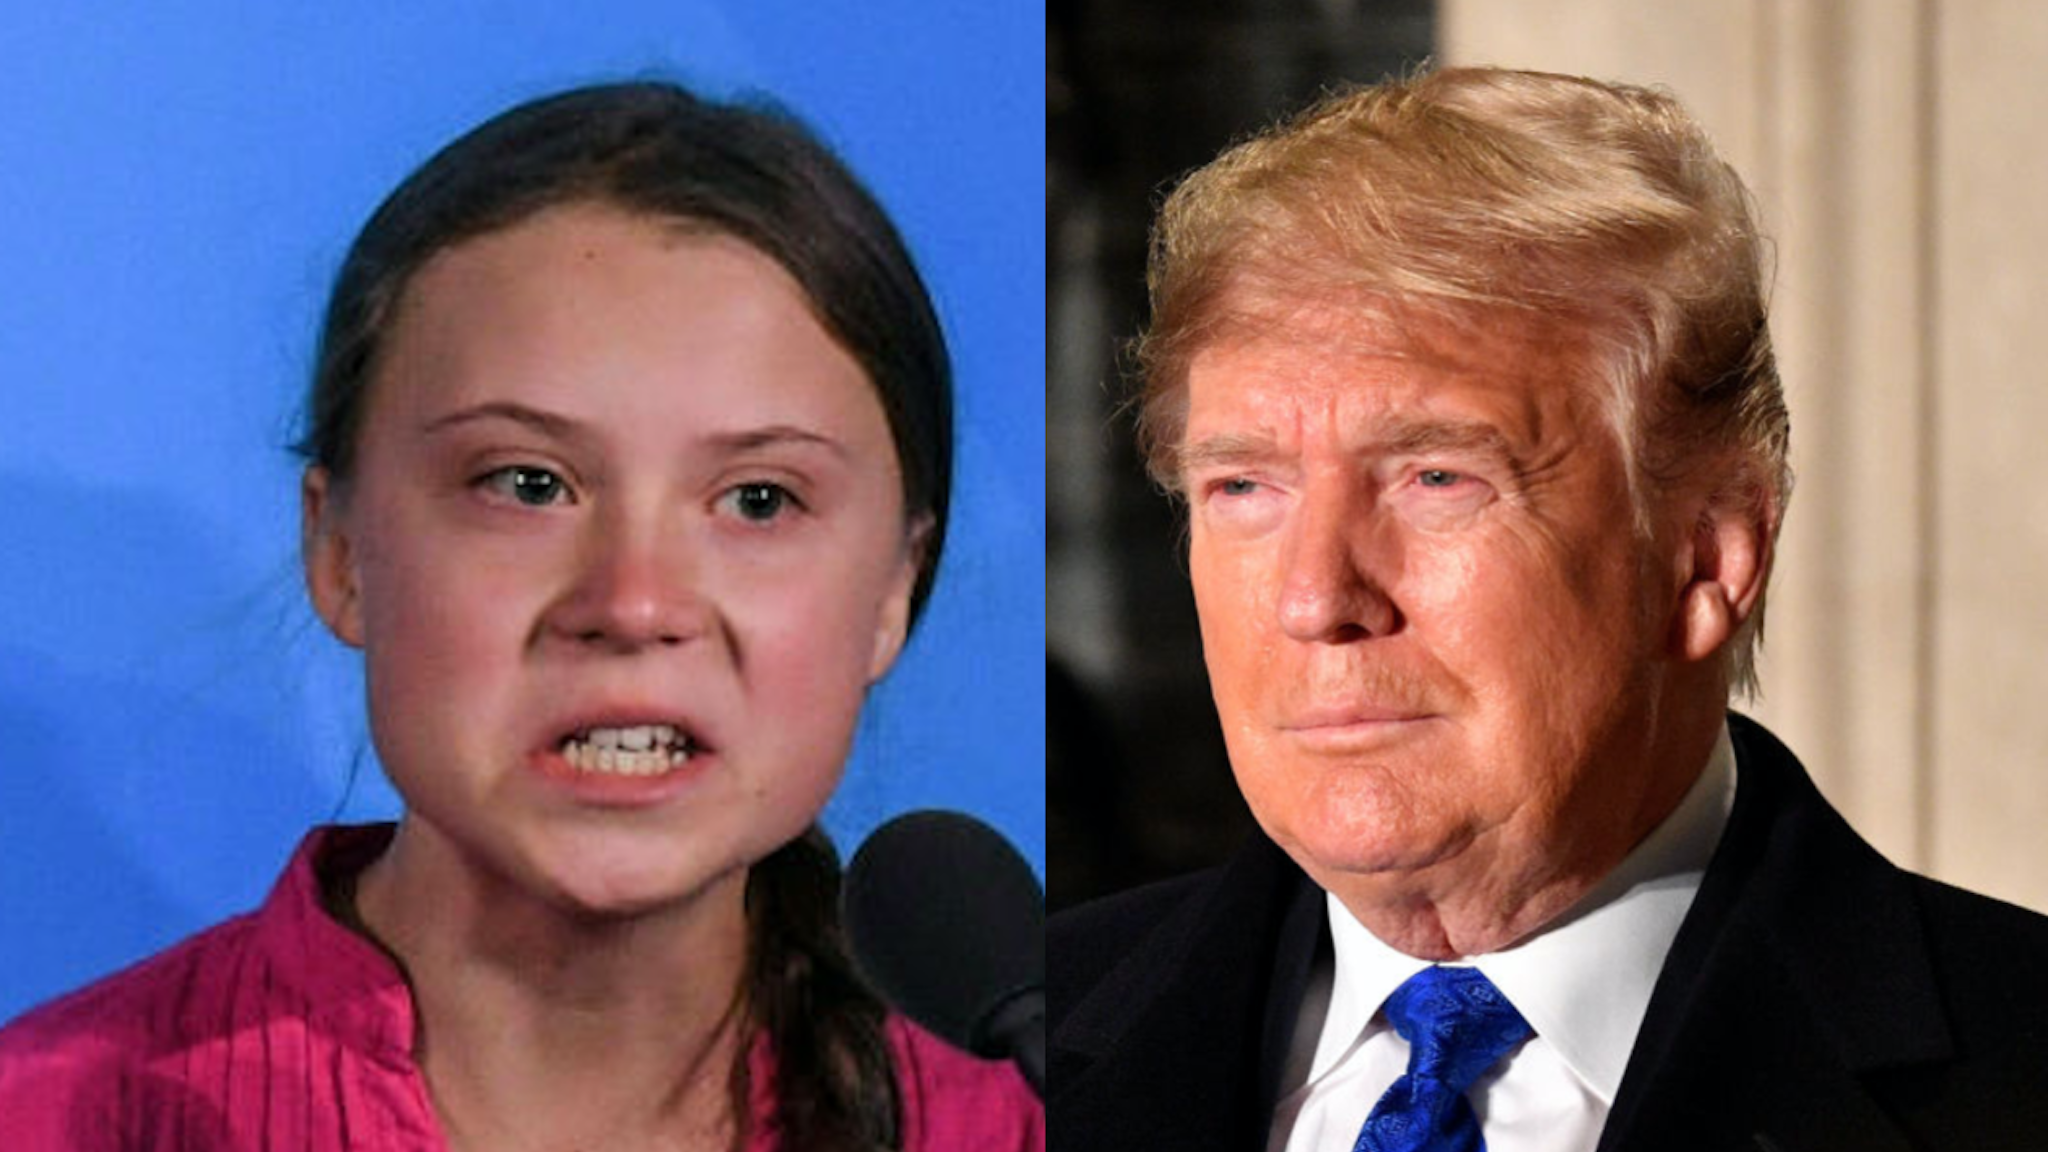 Youth Climate activist Greta Thunberg speaks during the UN Climate Action Summit on September 23, 2019 at the United Nations Headquarters in New York City. //US President Donald Trump arrives at number 10 Downing Street for a reception on December 3, 2019 in London, England.